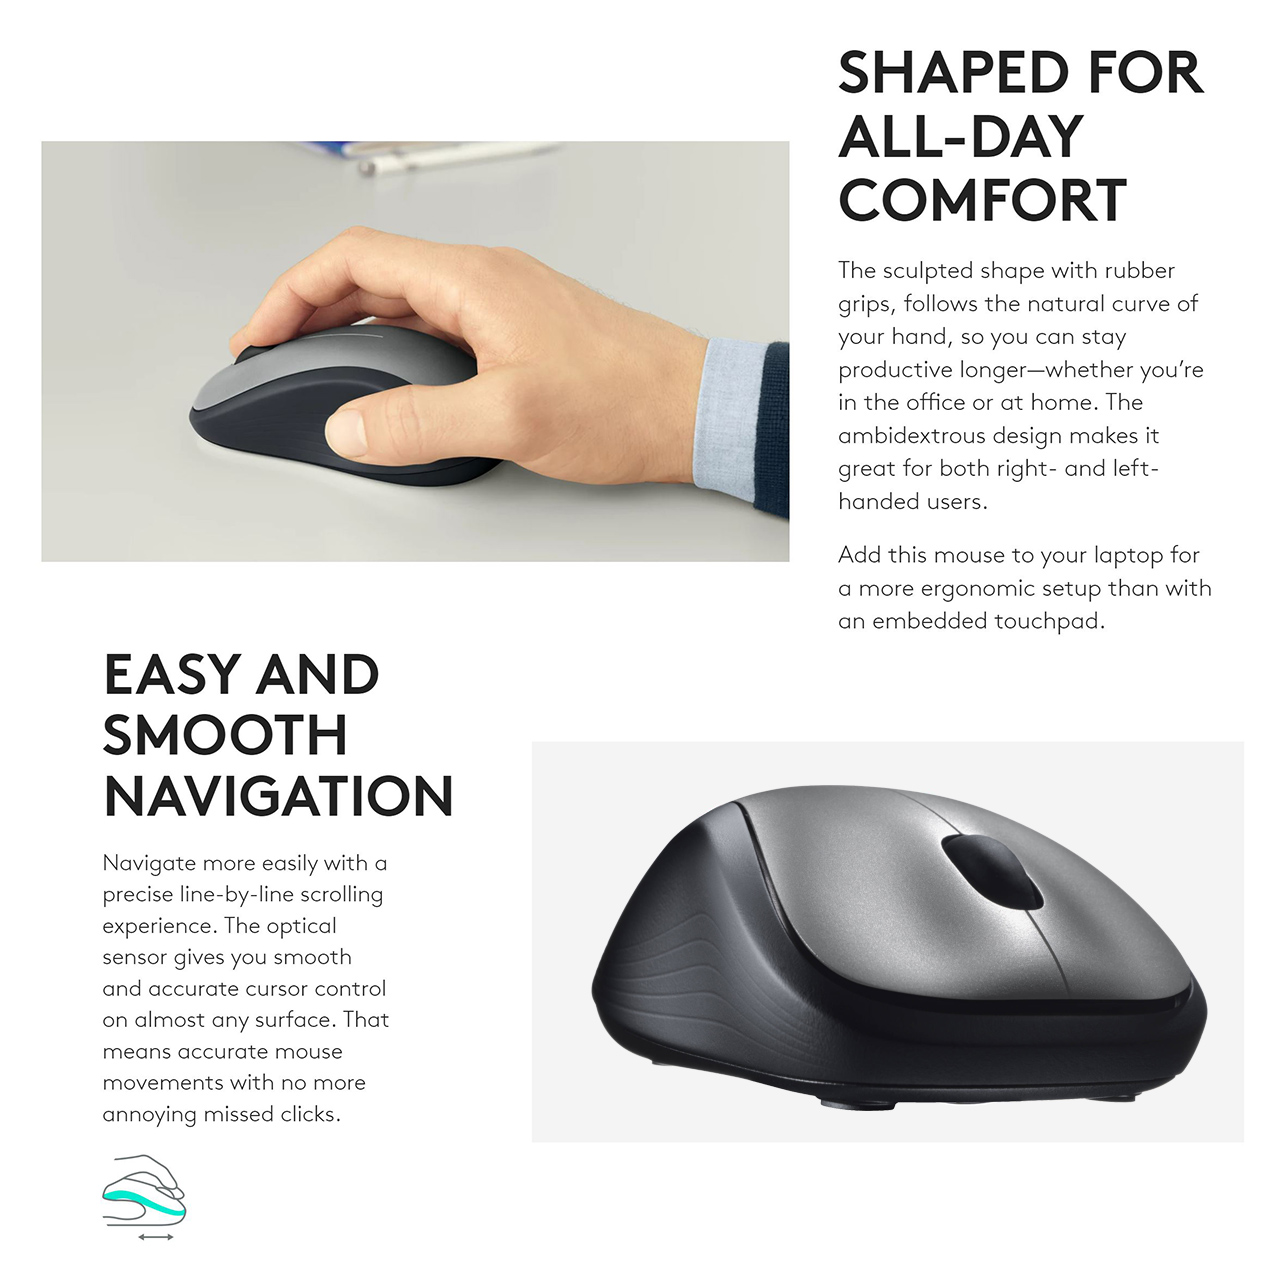 Logitech Wireless Mouse M190 - Full Size Ambidextrous Curve Design,  18-Month Battery with Power Saving Mode, Precise Cursor Control &  Scrolling, Wide Scroll Wheel, Thumb Grips (Charcoal) - Full-size Mouse -  Optical 